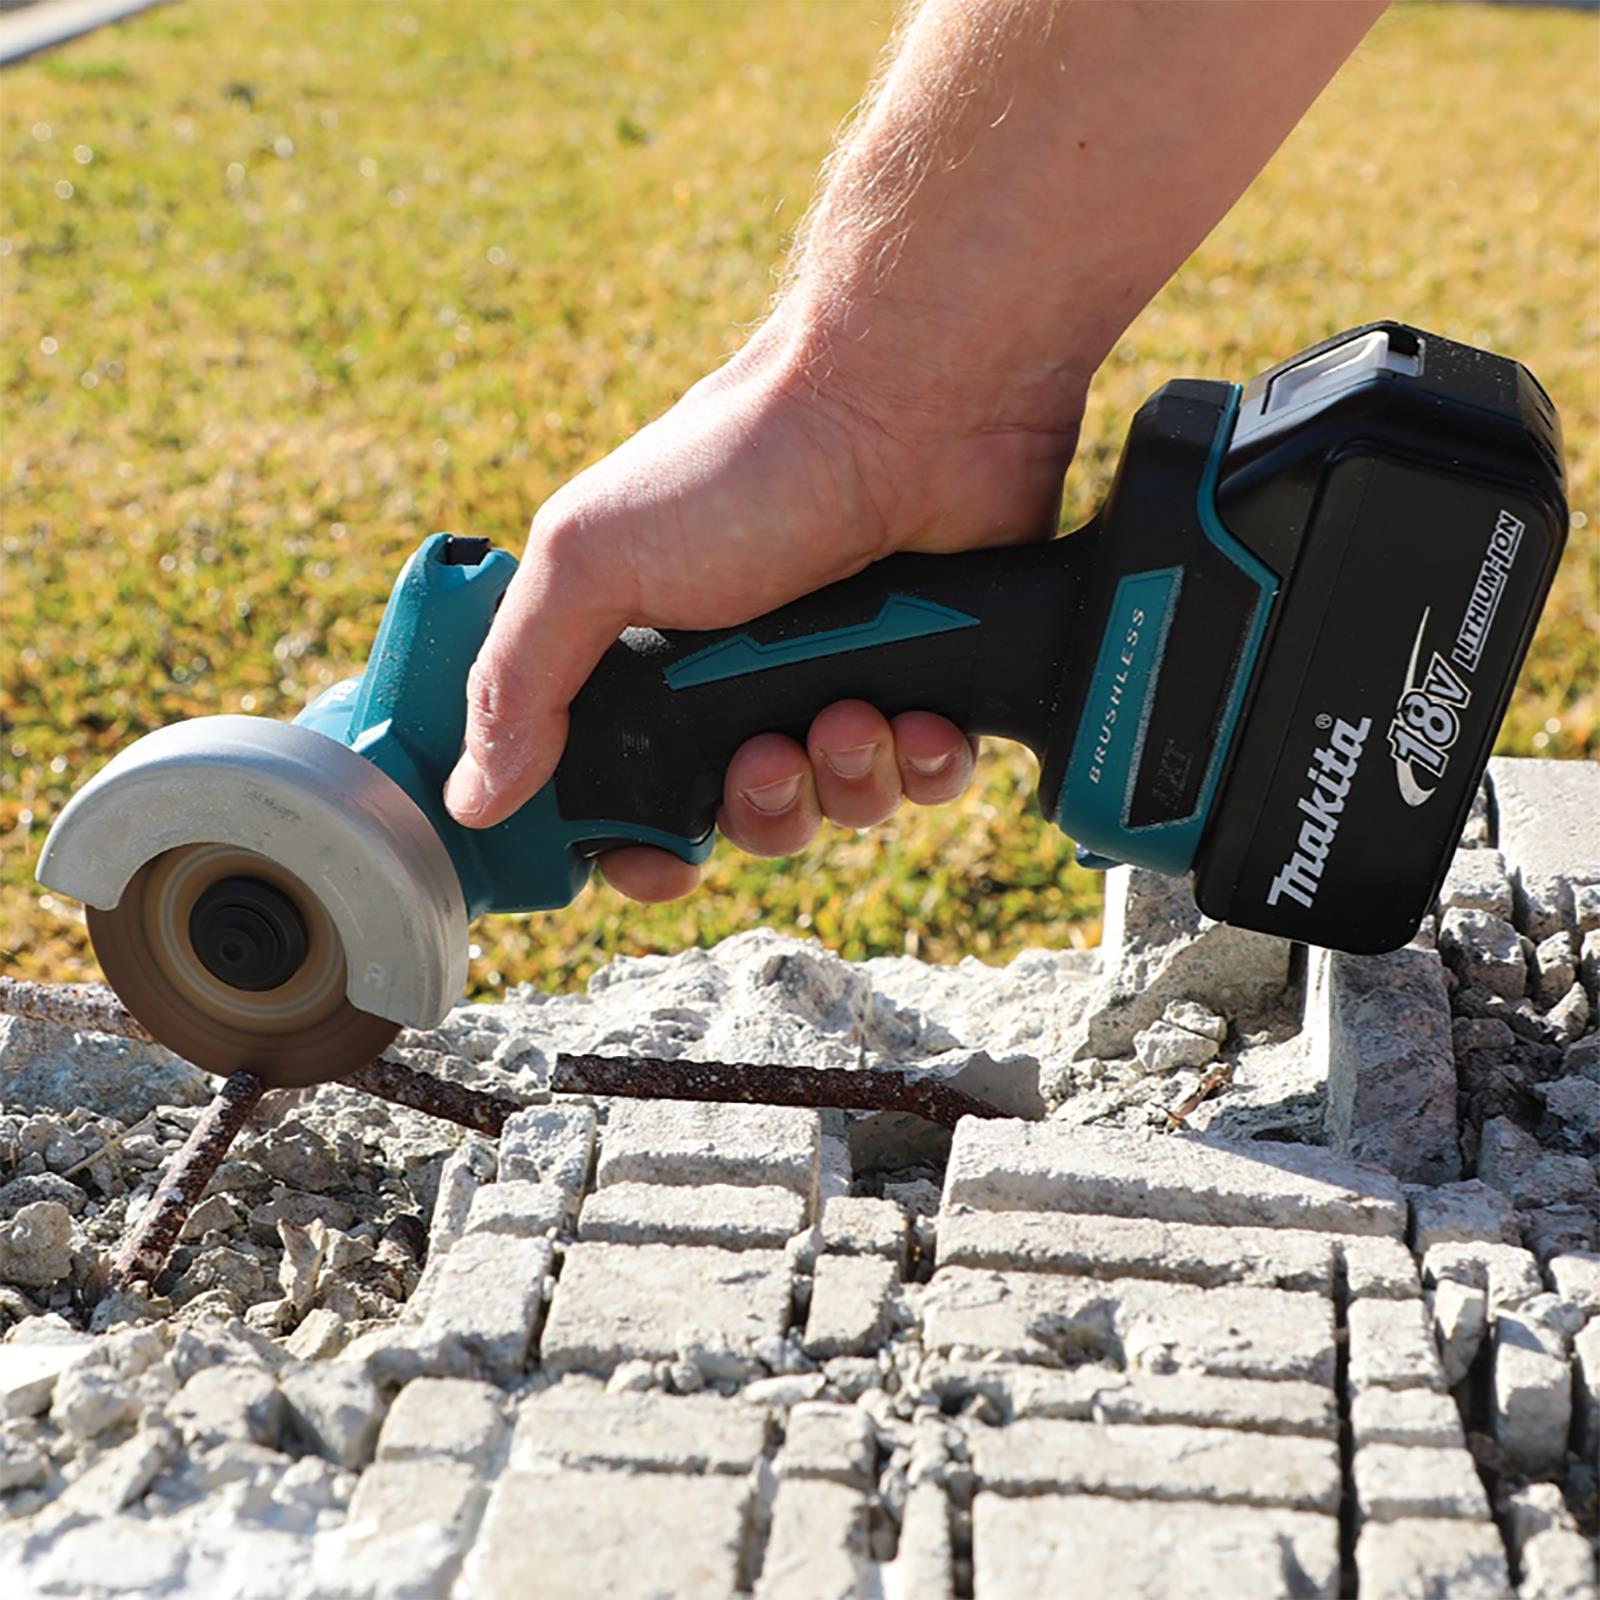 Makita Compact Disc Cutter Grinder 76mm 18V LXT Brushless Cordless DMC300Z Body Only